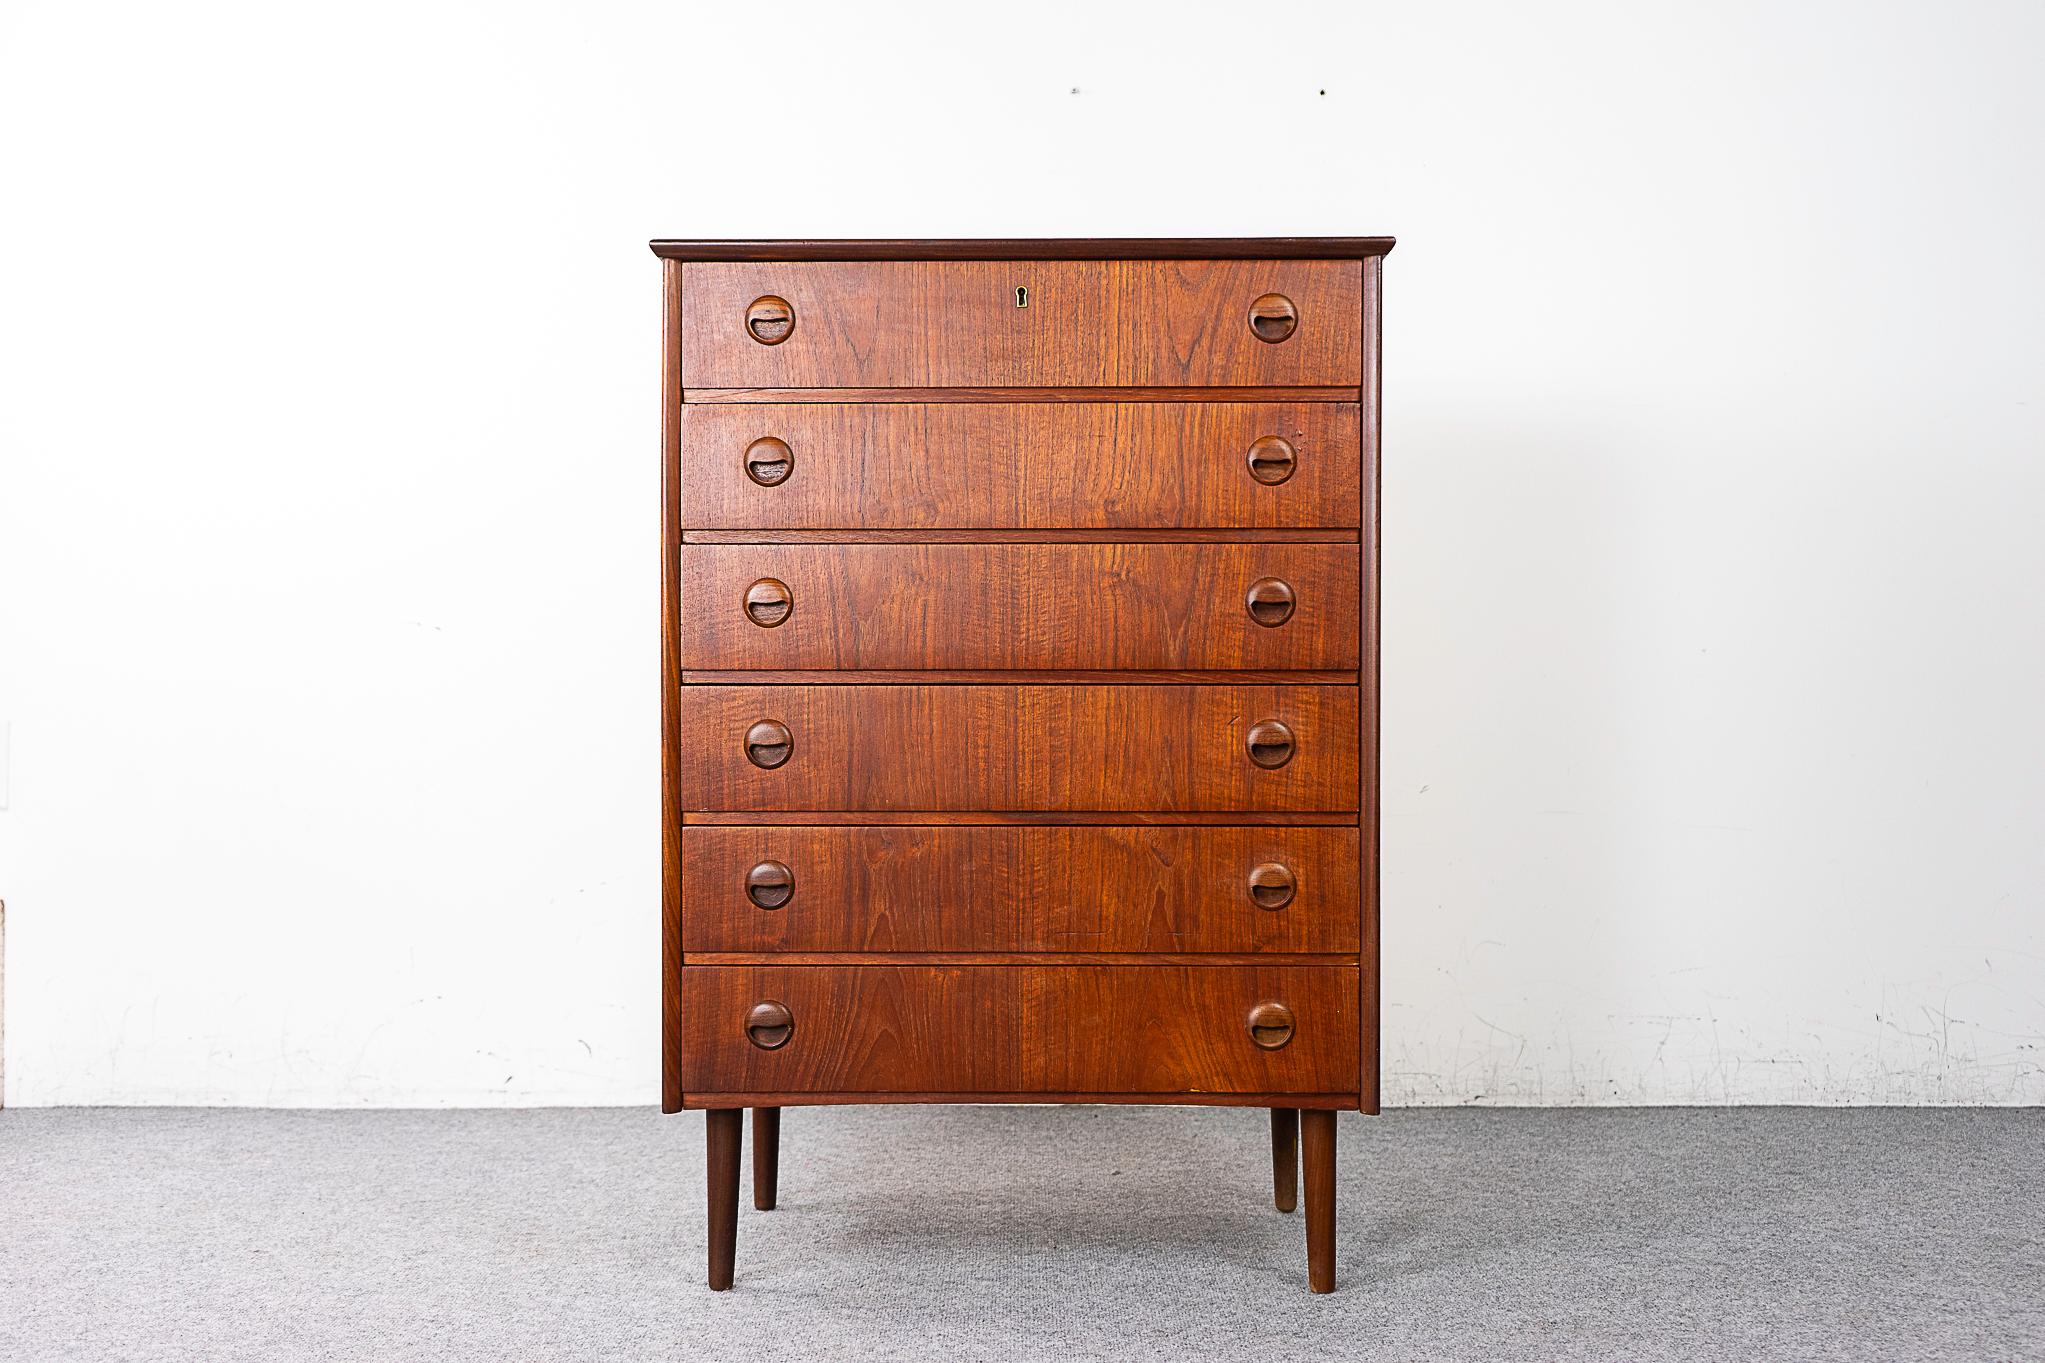 Teak Danish dresser, circa 1960's. Solid wood edging with stunning book-matched veneer top and drawer faces. Lovely finger pulls, dovetail construction and solid, removable, tapering legs!

Please inquire for remote and international shipping rates.